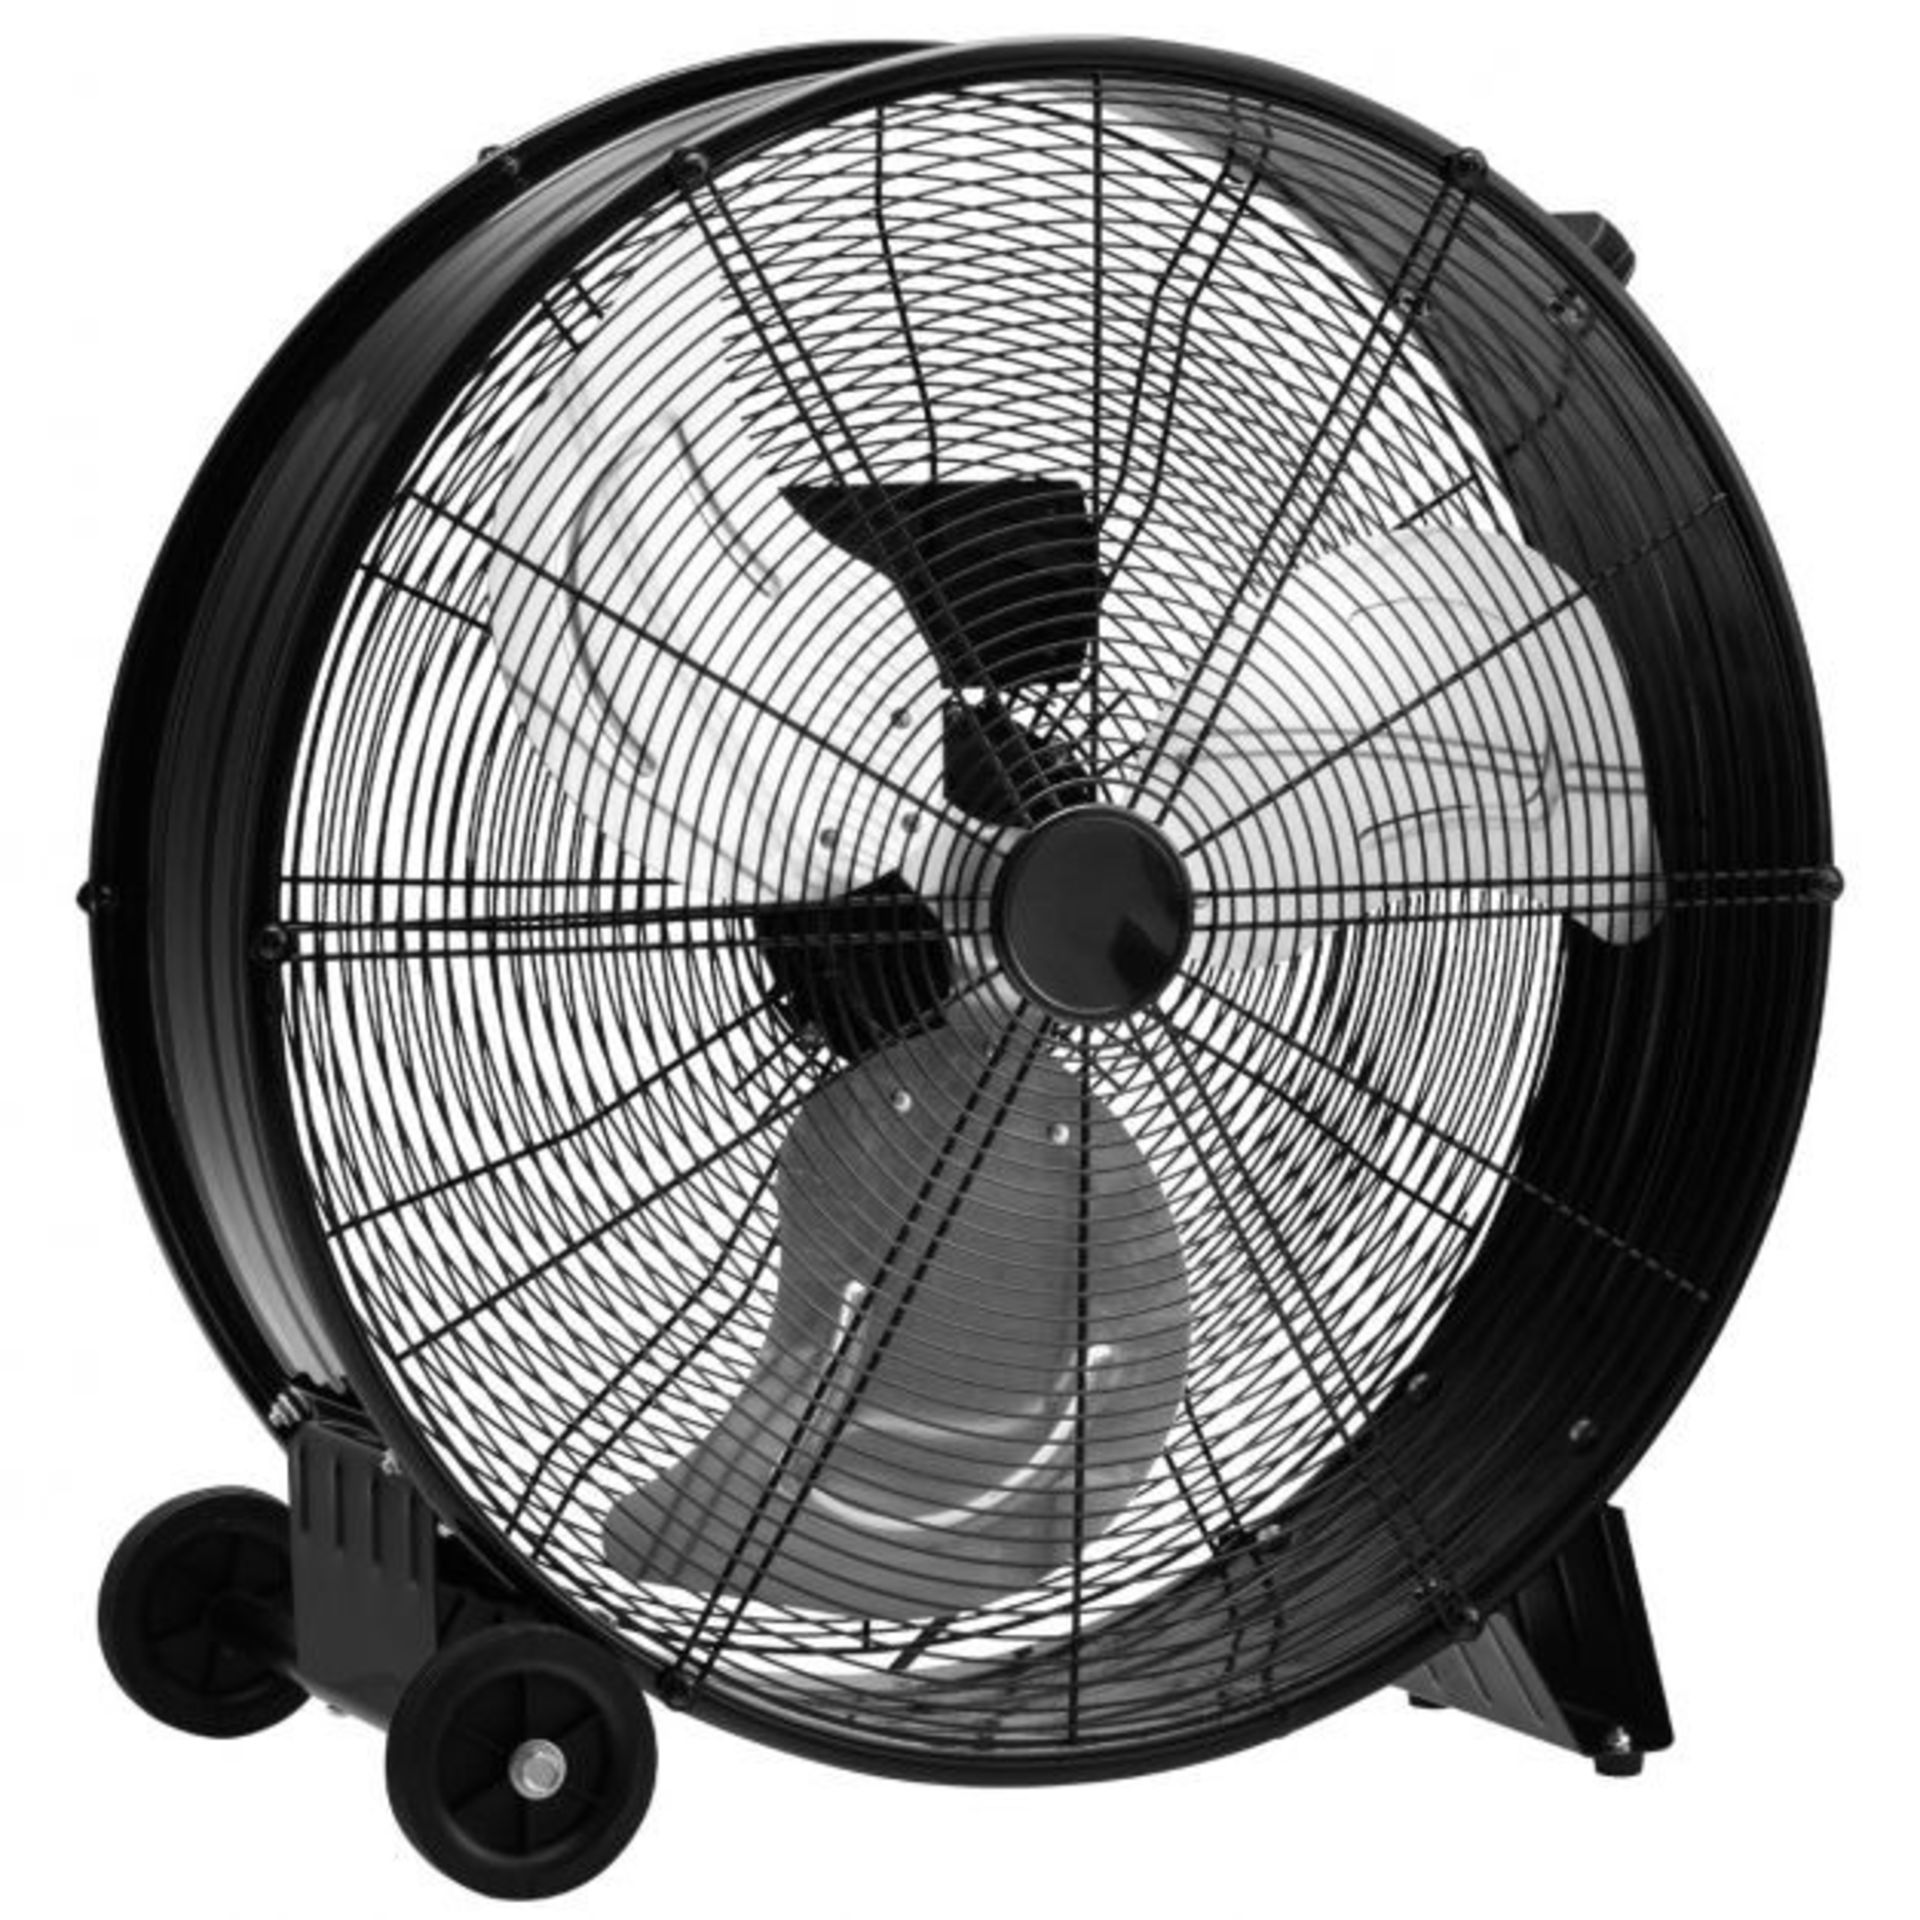 24 Inch High-Velocity Industrial Floor Fan with Wheels and Handle - ER53